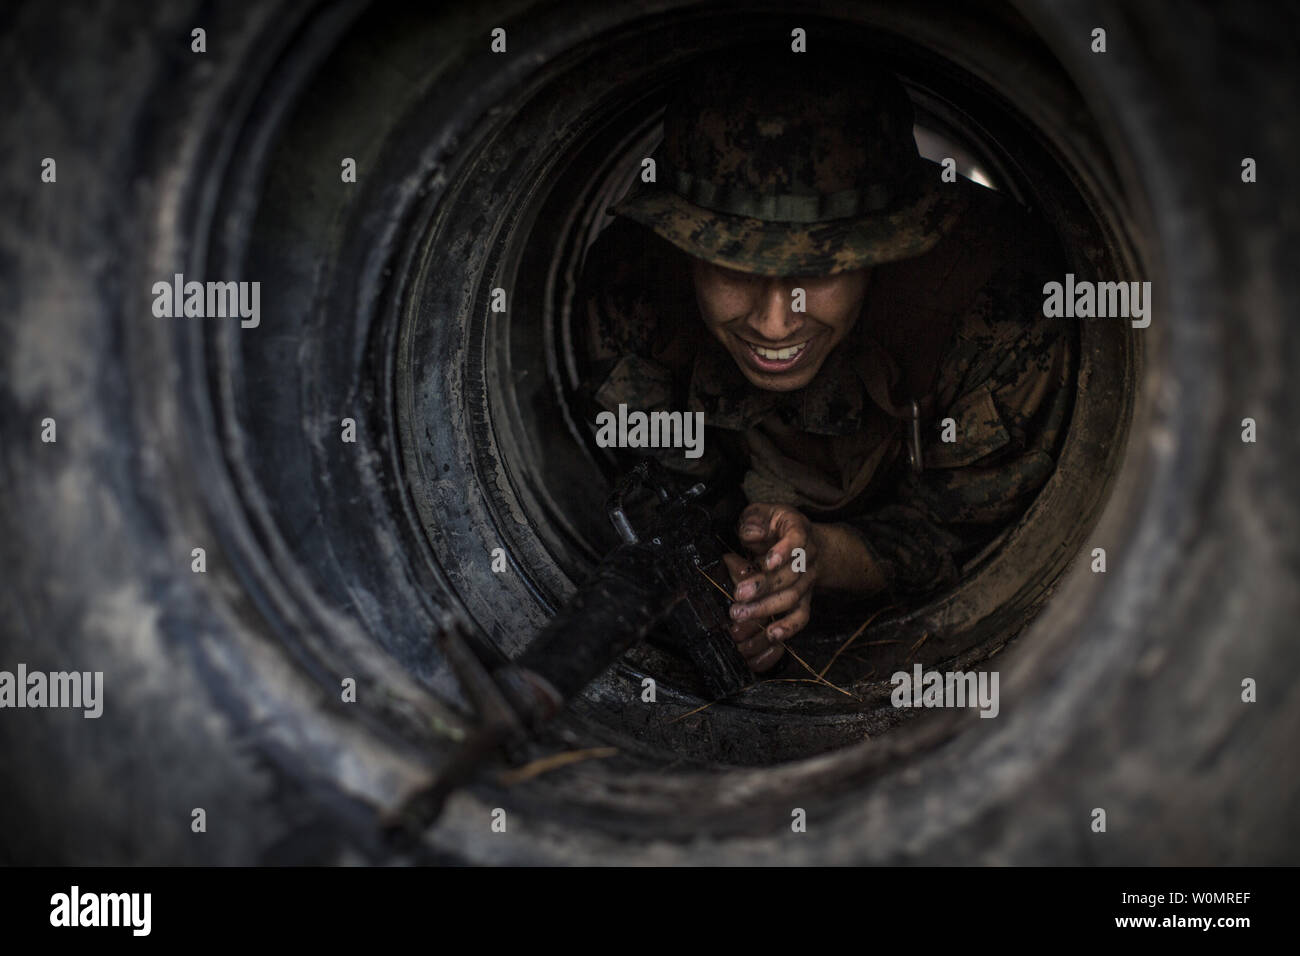 U.S. Marine Corps Cpl. Manuel Serrano, a combat videographer with the Combat Camera section, Marine Corps Combat Service Support Schools, moves through a tire obstacle while navigating an obstacle course on Camp Johnson, N.C., December 12, 2016. The Combat Camera Marines ran through multiple obstacle courses as part of section physical training in order to maintain a state of constant readiness and strengthen unit cohesion. Photo by Andrew Kuppers/U.S. Marine Corps/UPI Stock Photo